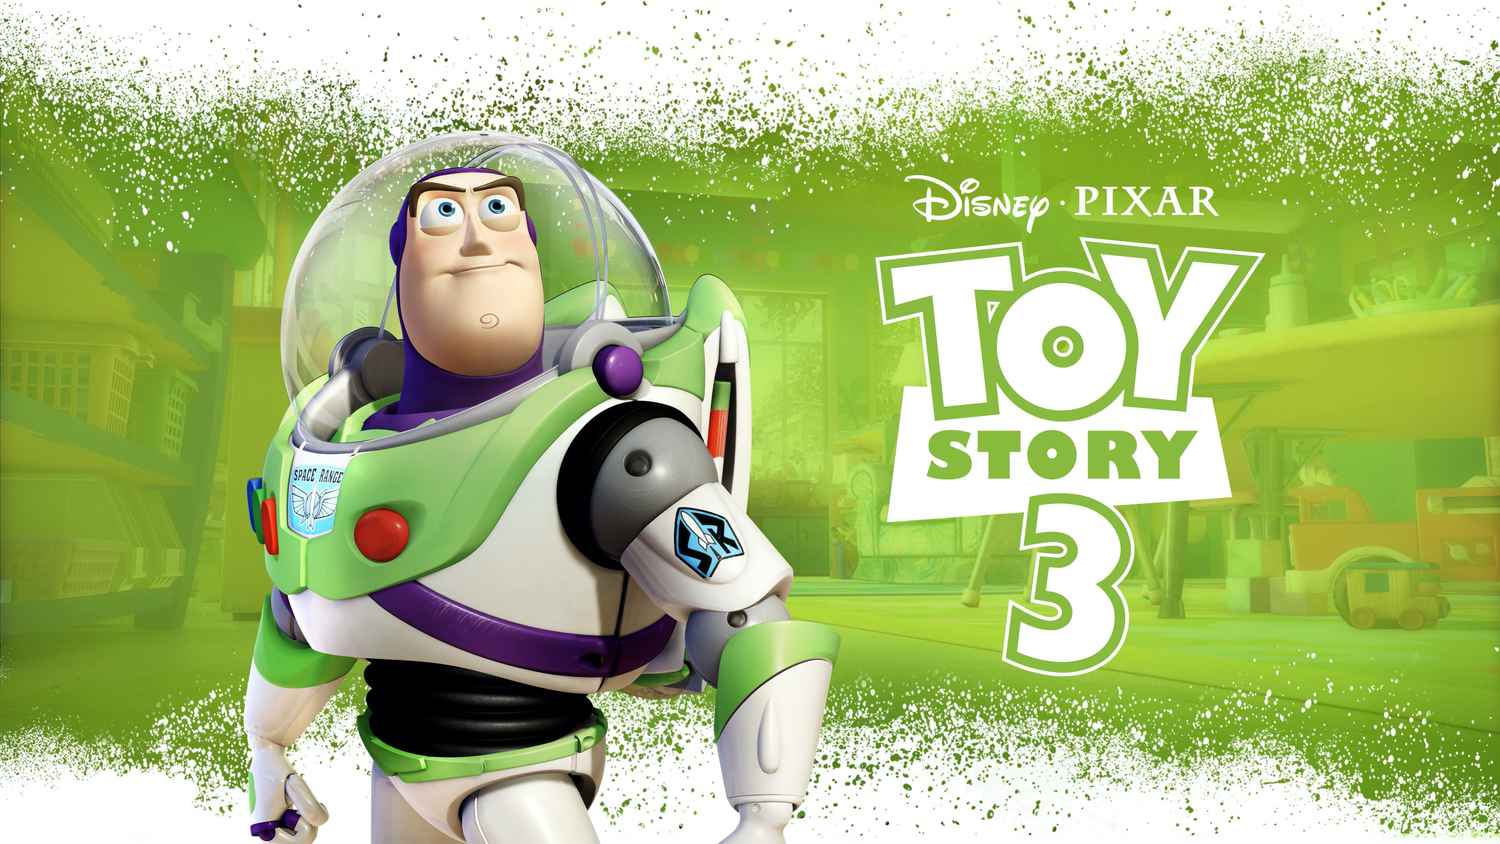 when did toy story 3 come out